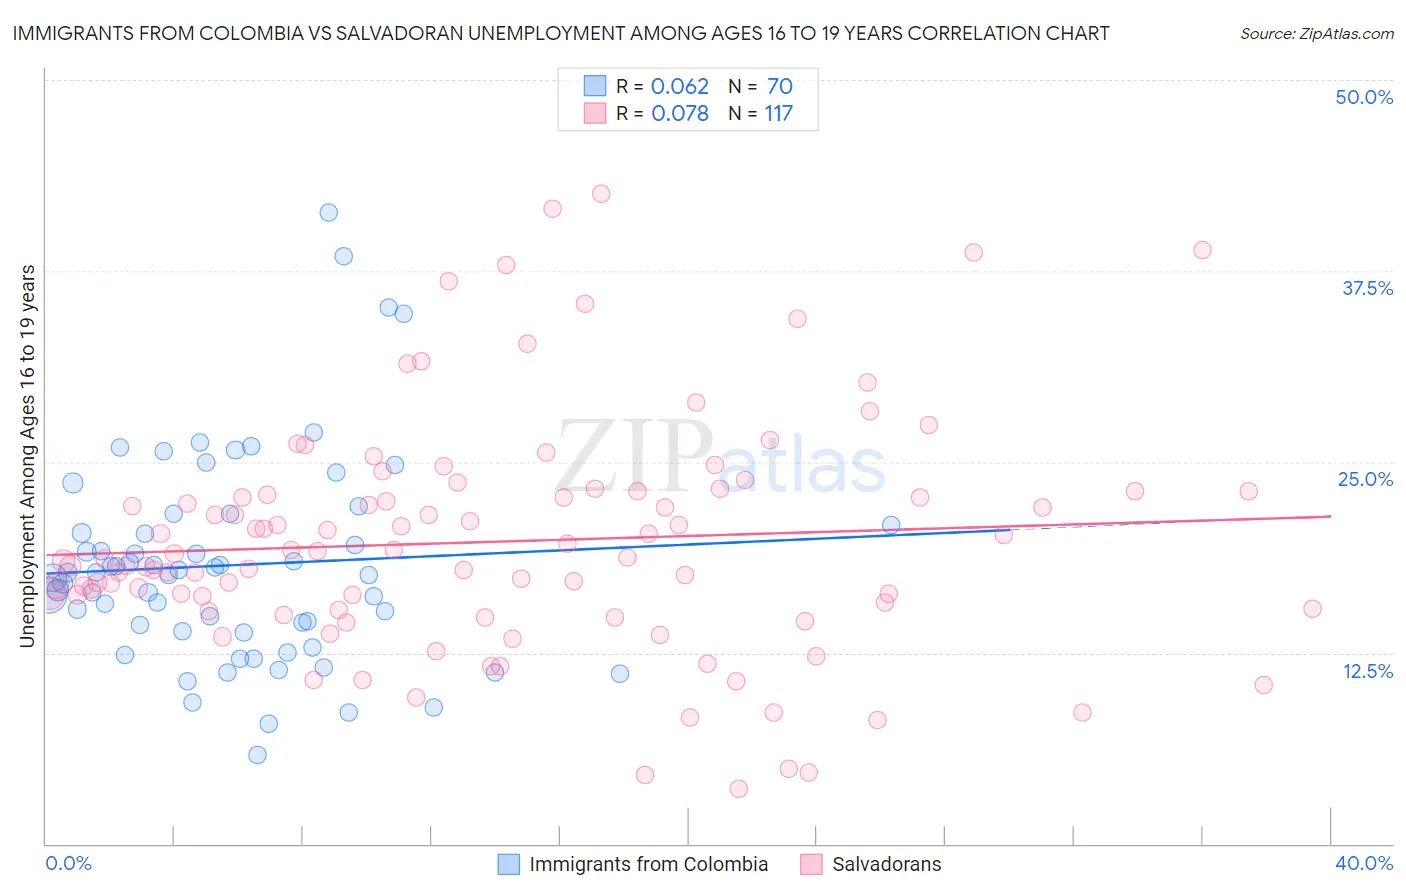 Immigrants from Colombia vs Salvadoran Unemployment Among Ages 16 to 19 years